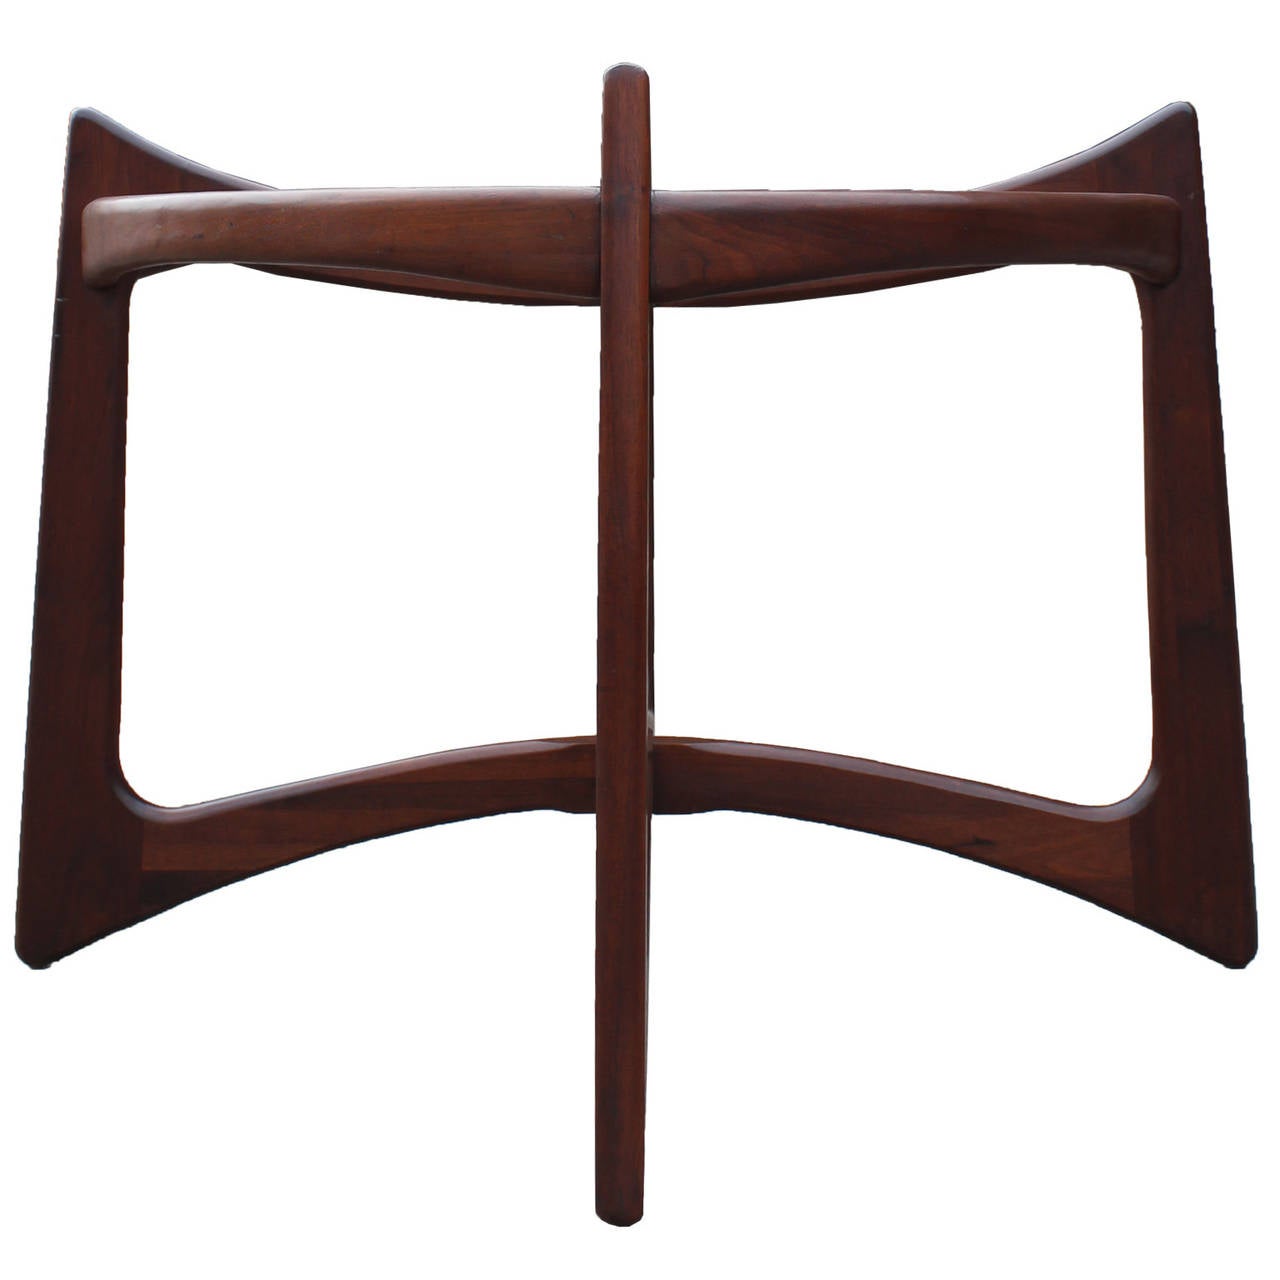 American Sculptural Organic Adrian Pearsall Table Base